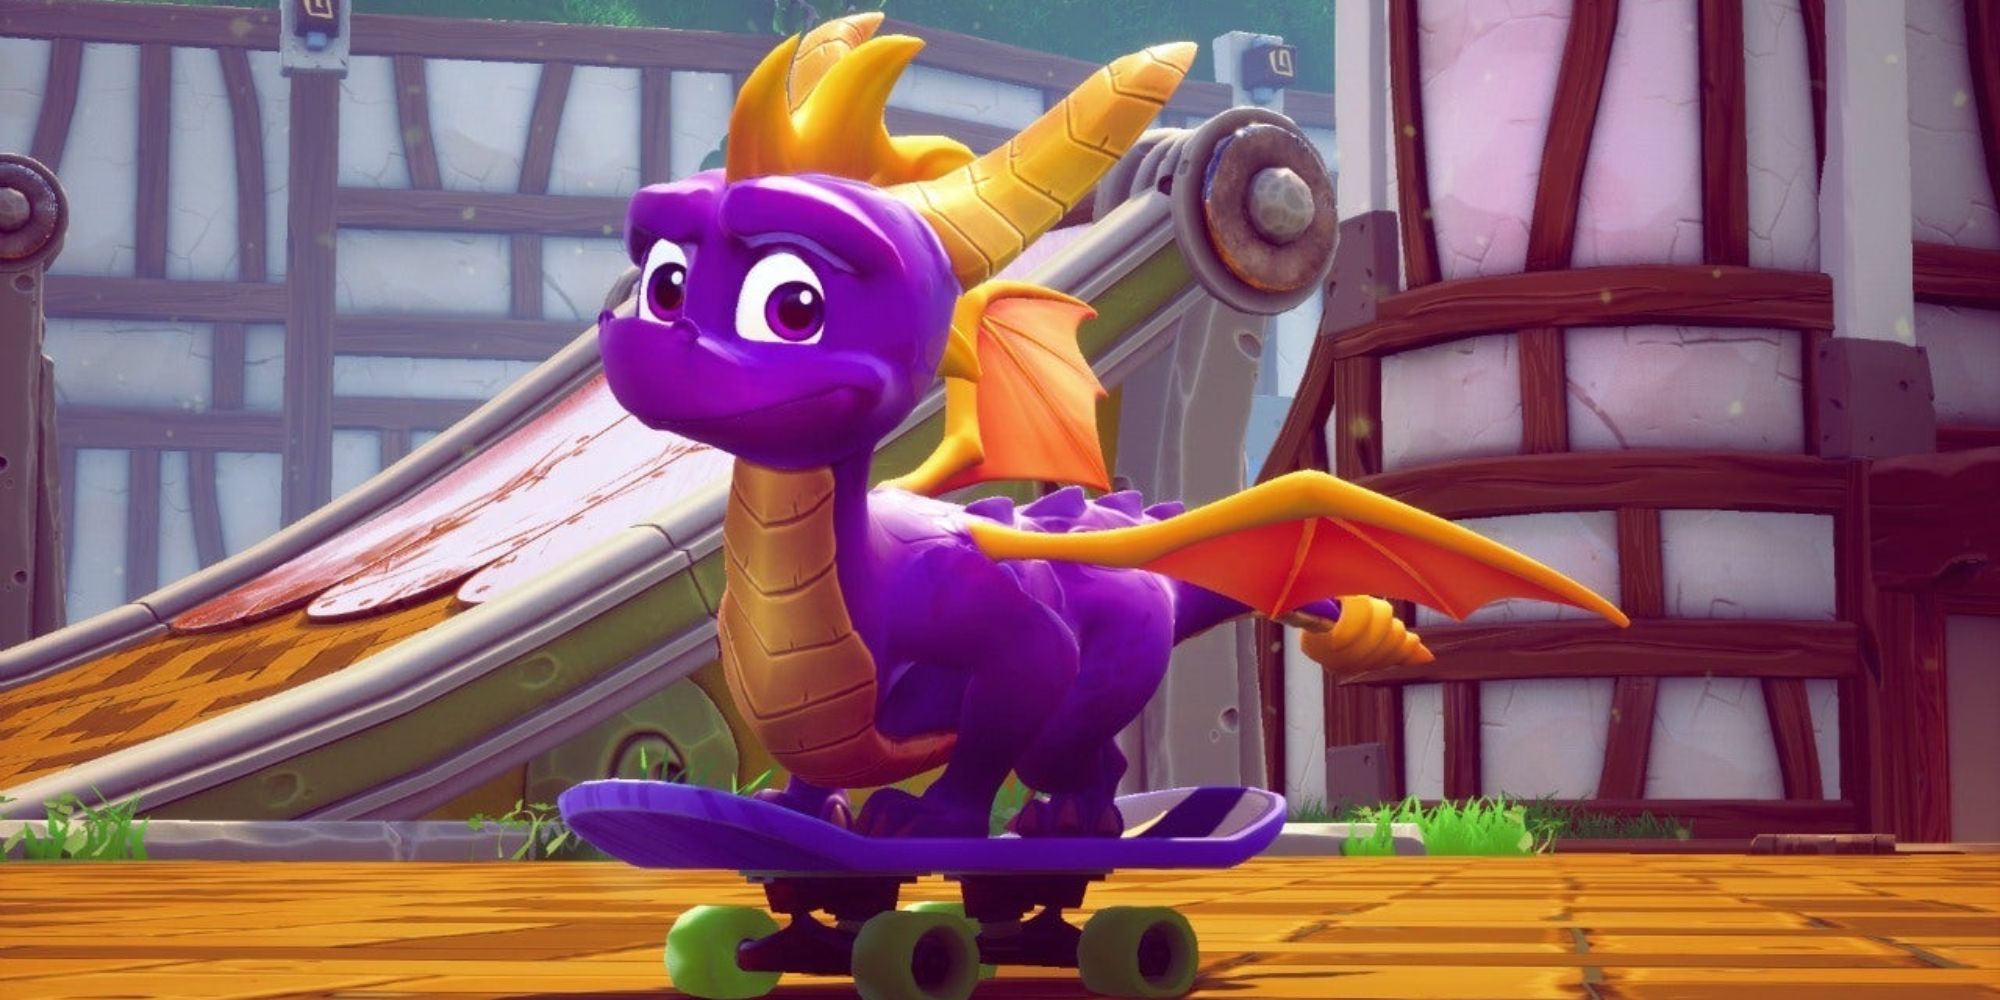 Spyro skateboards in the year of the dragon.